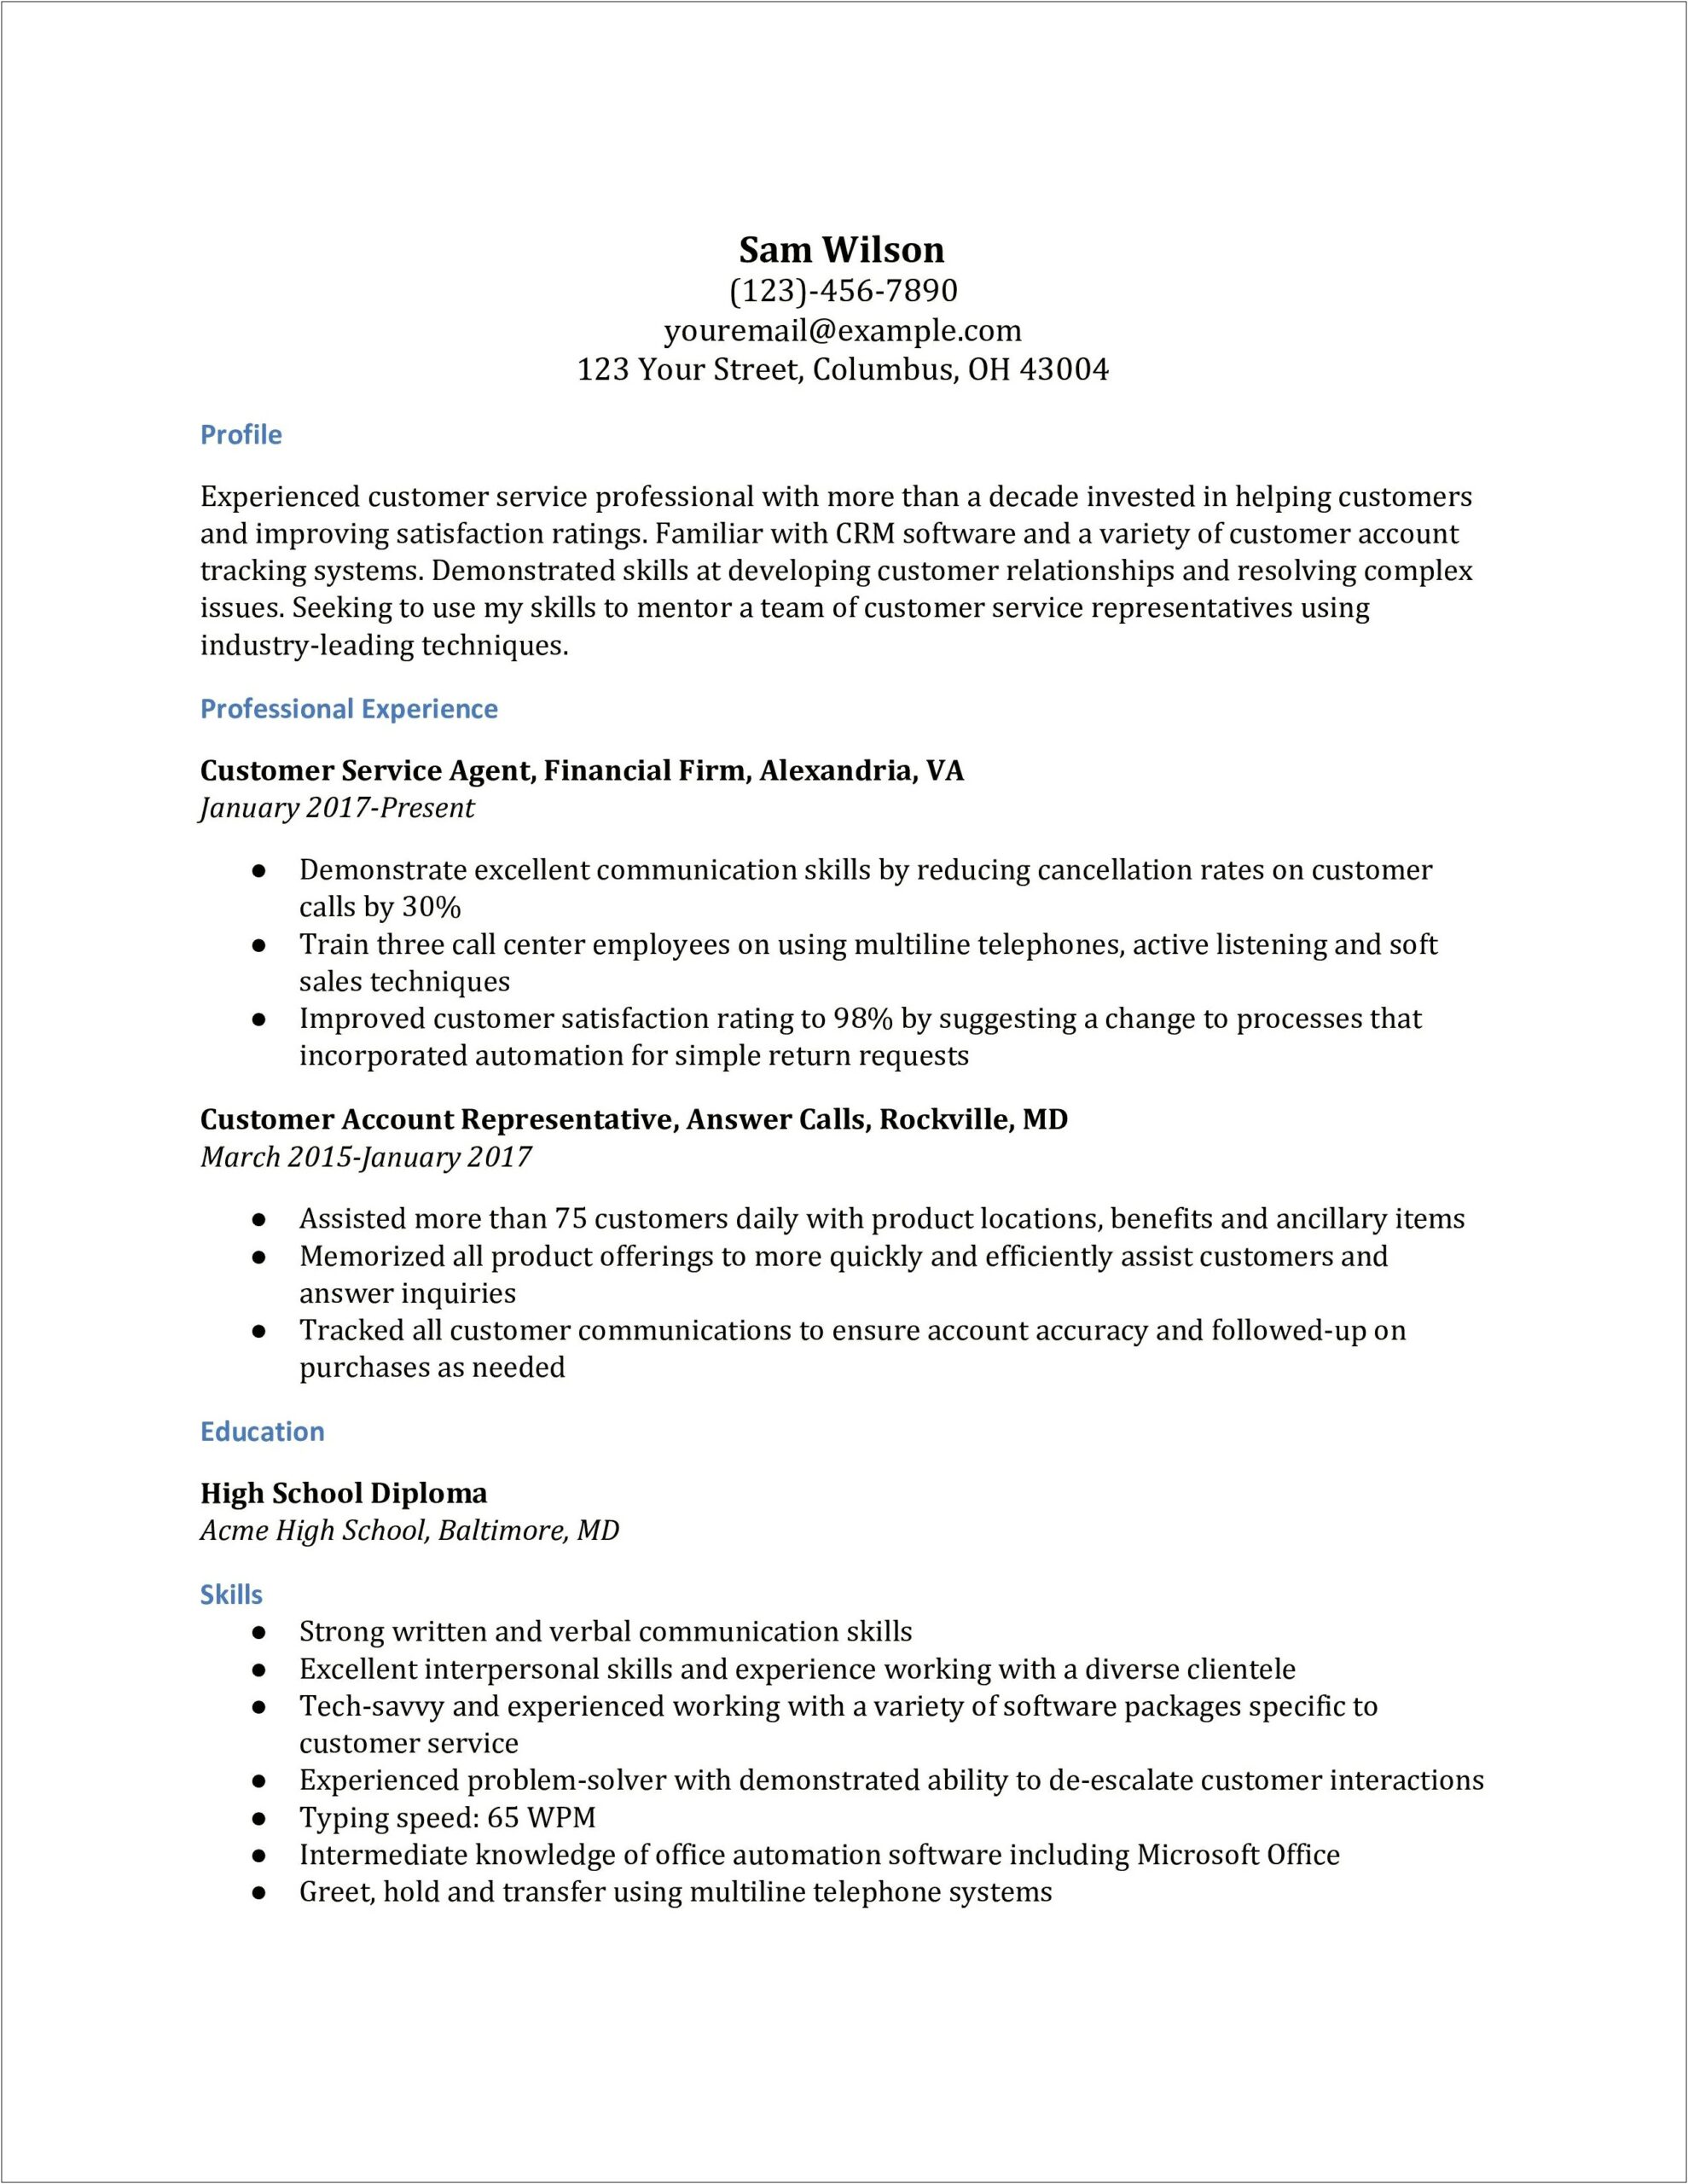 Resume Qualifications For Working In Customer Service